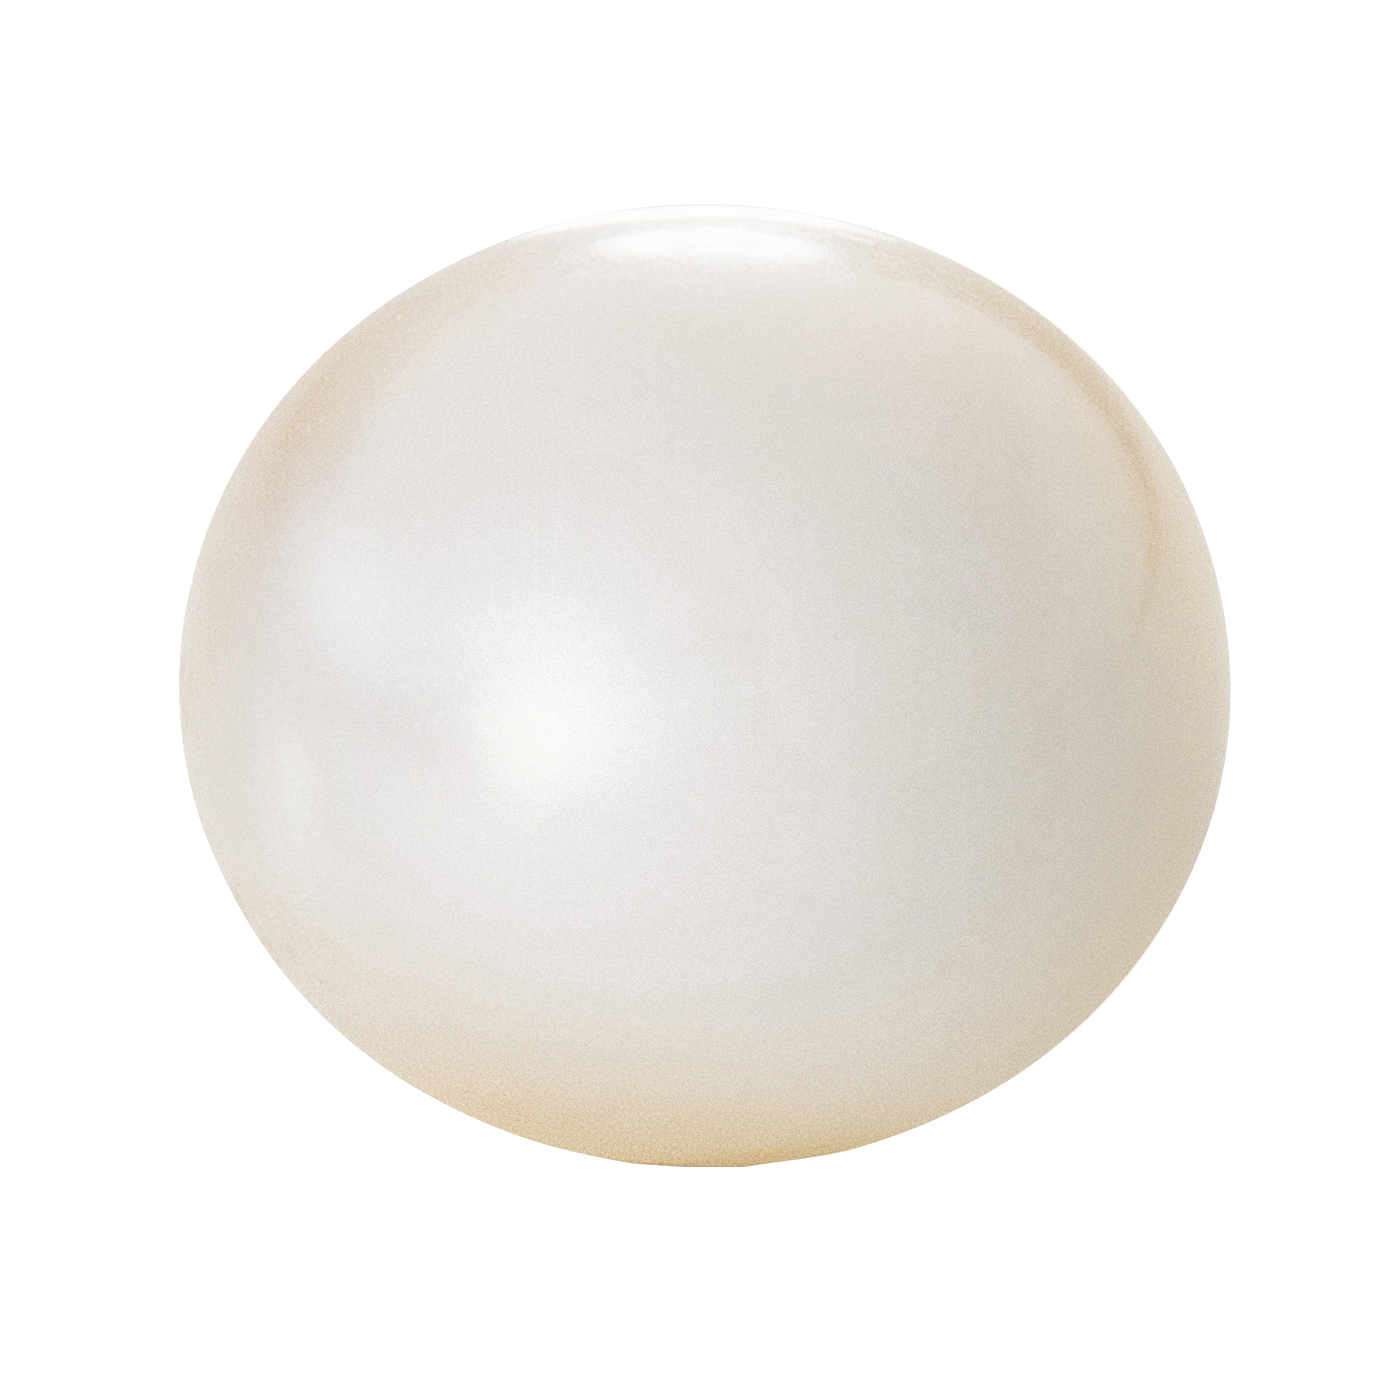 Cultured Pearl, Freshwater, Bouton, ø 9.5-10.0 mm, White - 1 piece